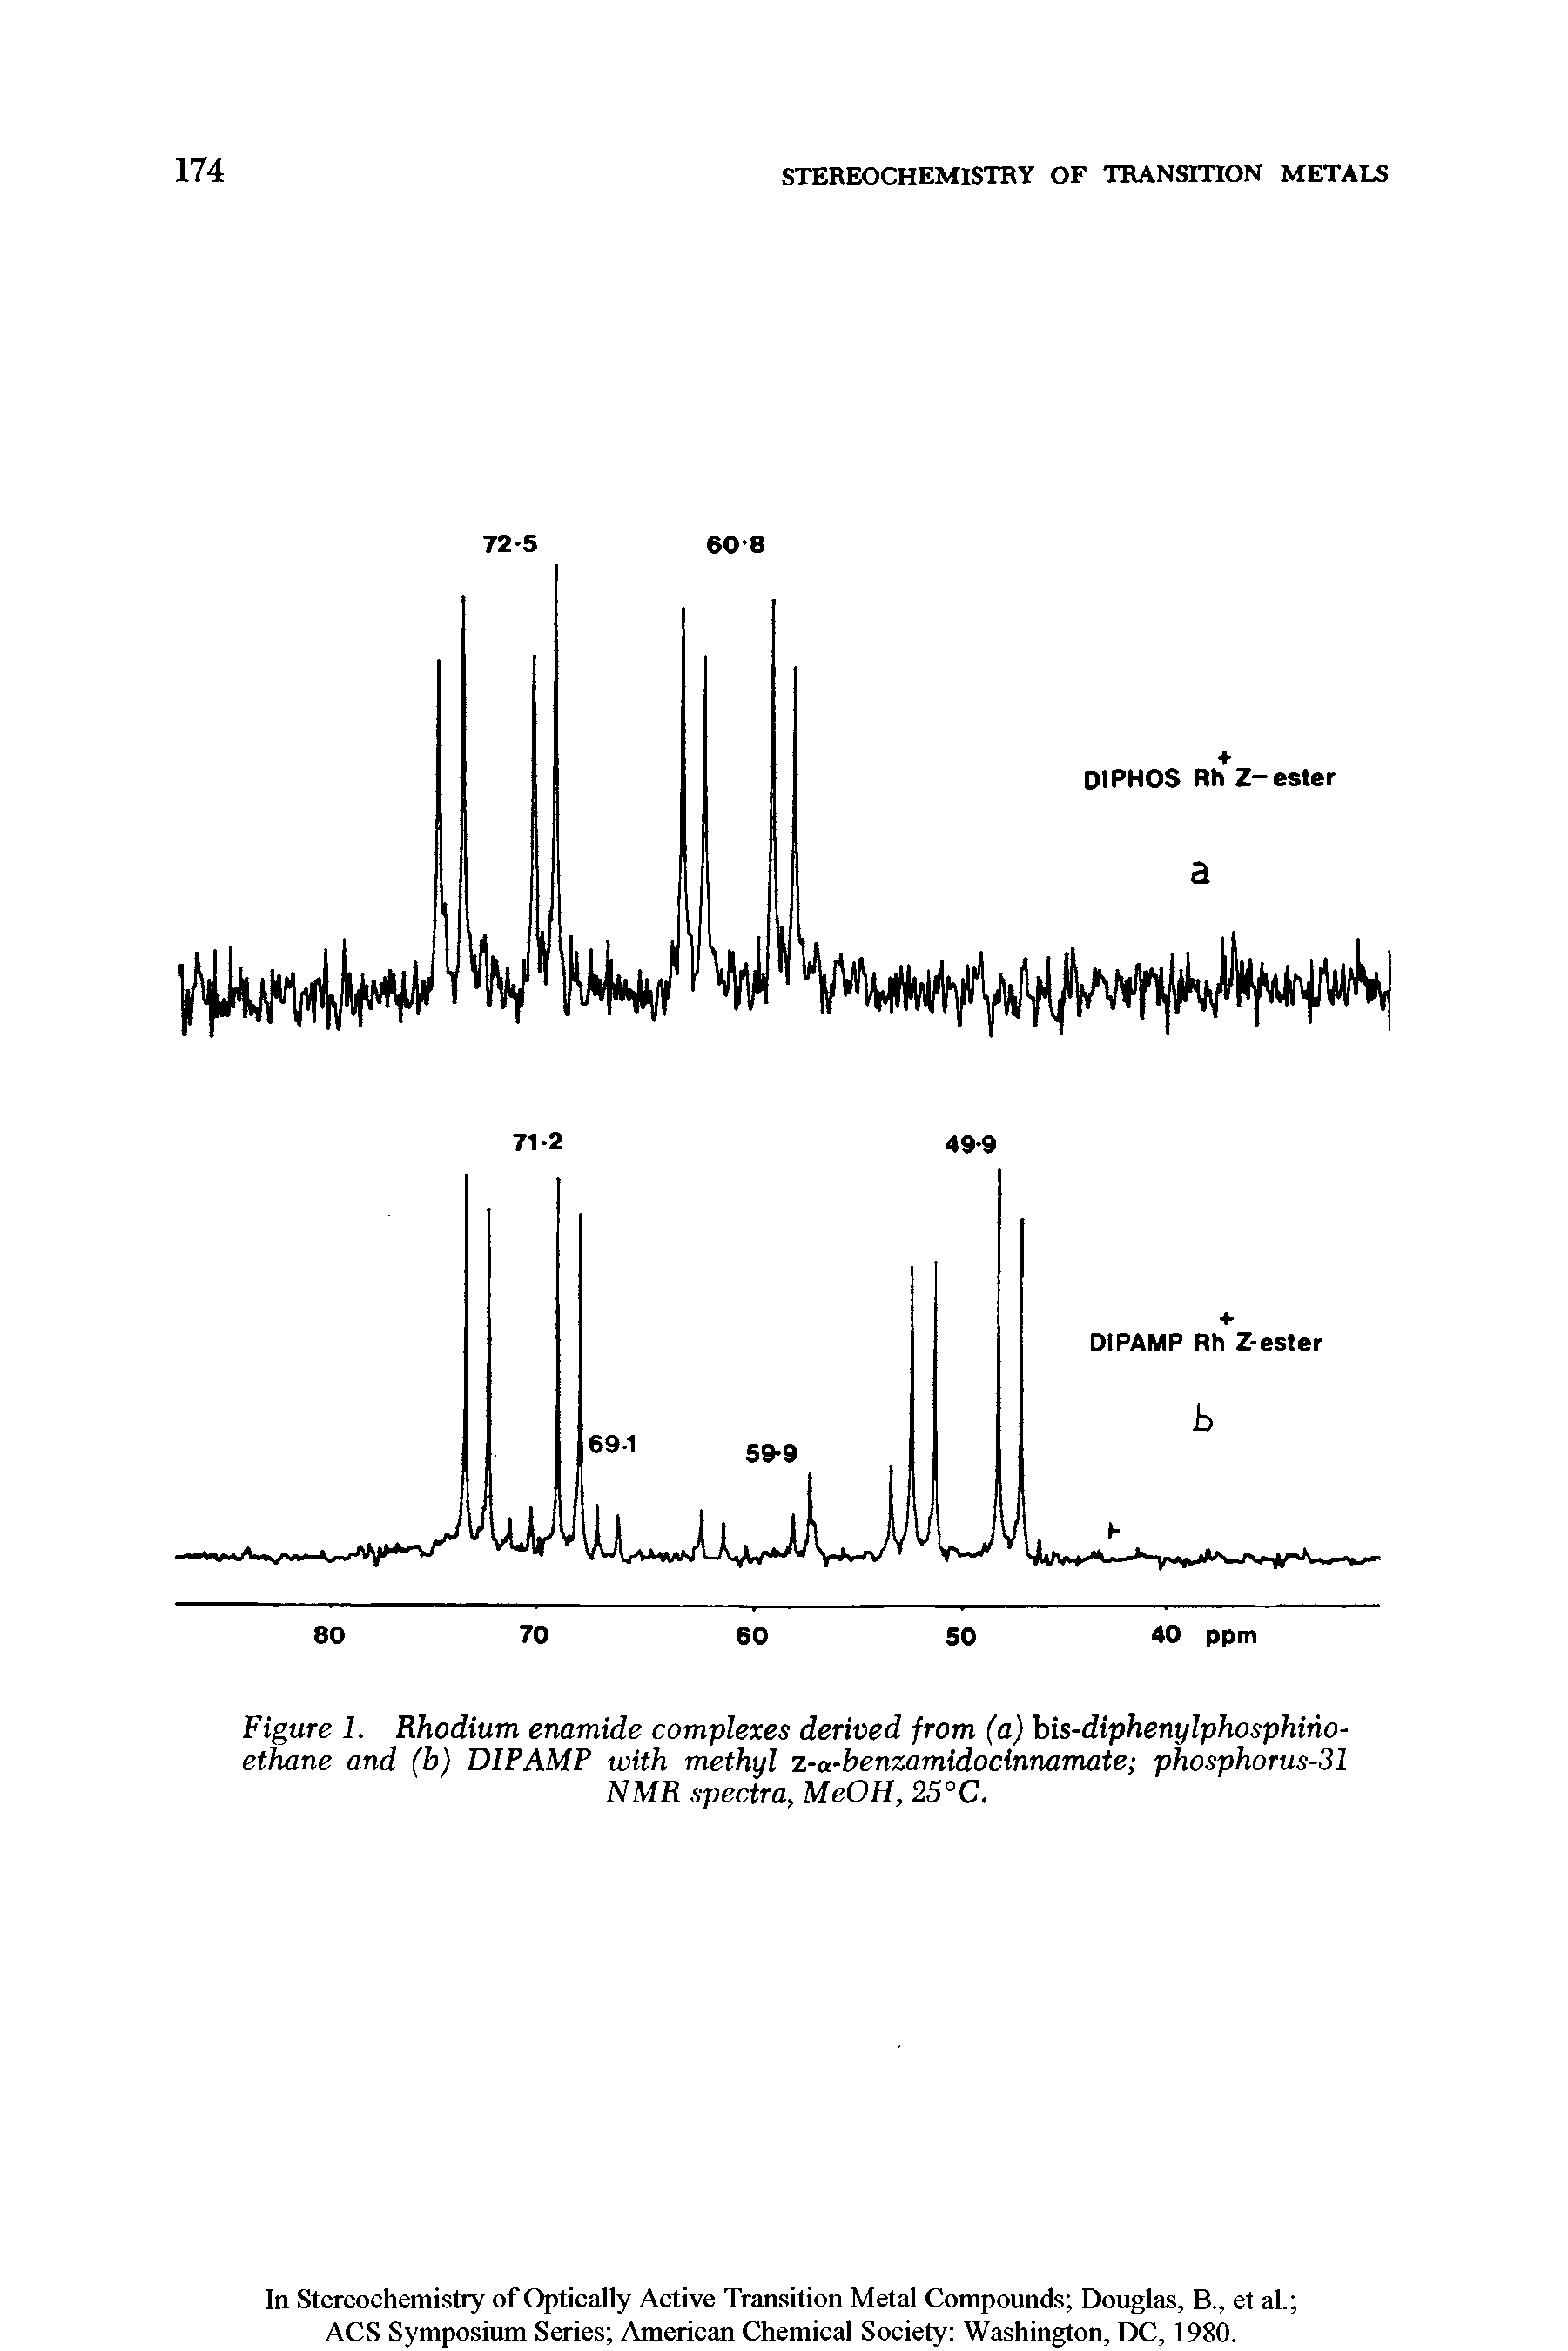 Figure 1. Rhodium enamide complexes derived from (a) bis-diphenylphosphiho-ethane and (b) DIP AMP with methyl z-a-benzamidocinnamate phosphorus-31 NMR spectra, MeOH, 25°C.